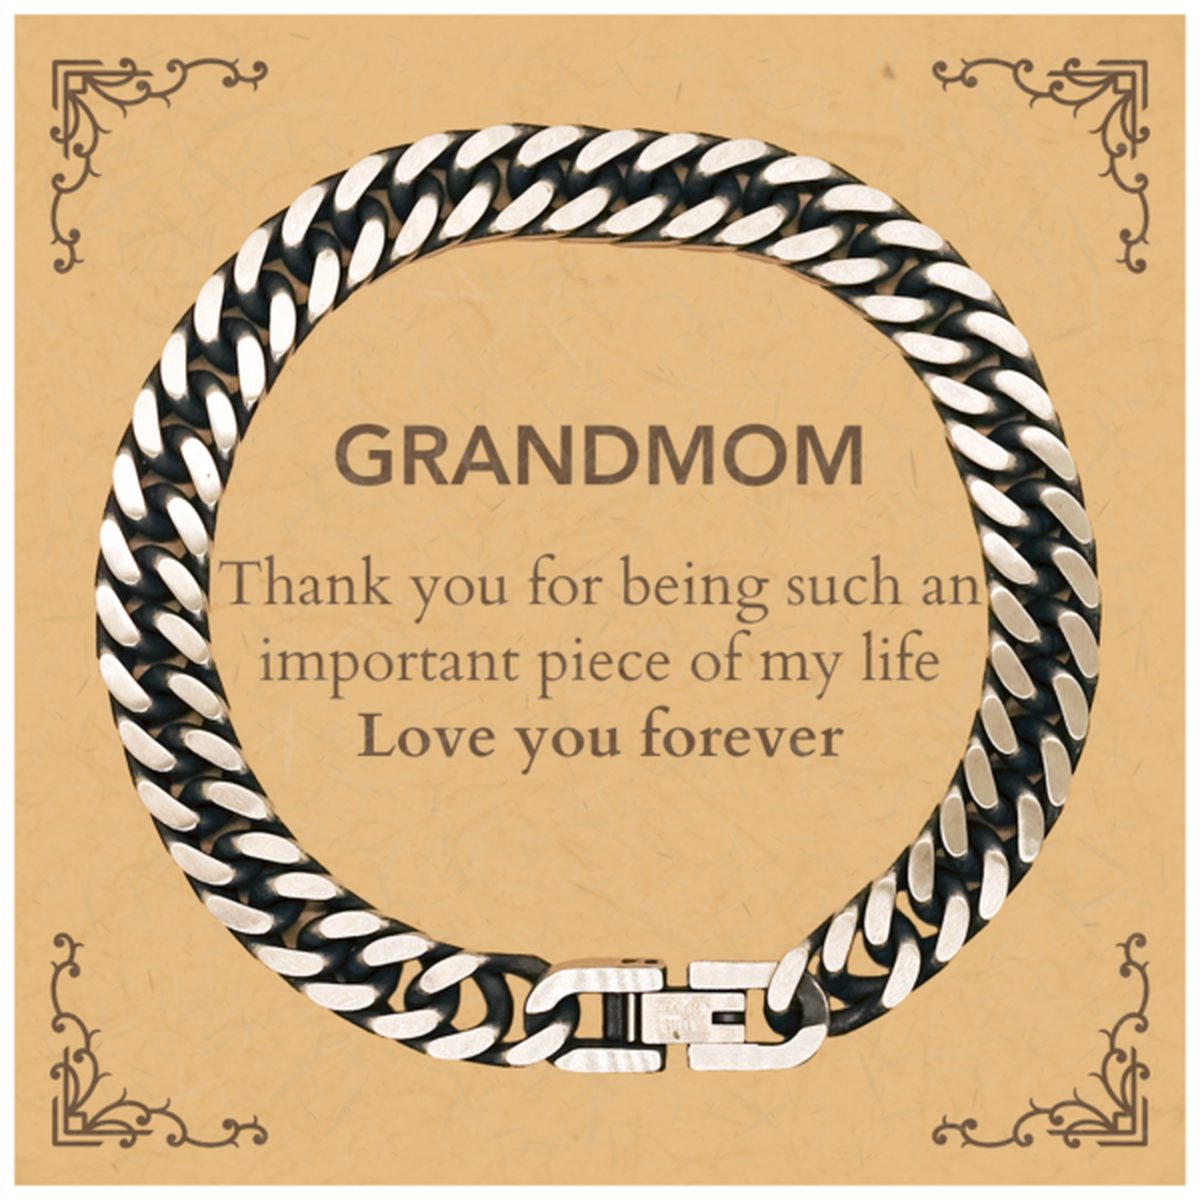 Appropriate Grandmom Cuban Link Chain Bracelet Epic Birthday Gifts for Grandmom Thank you for being such an important piece of my life Grandmom Christmas Mothers Fathers Day